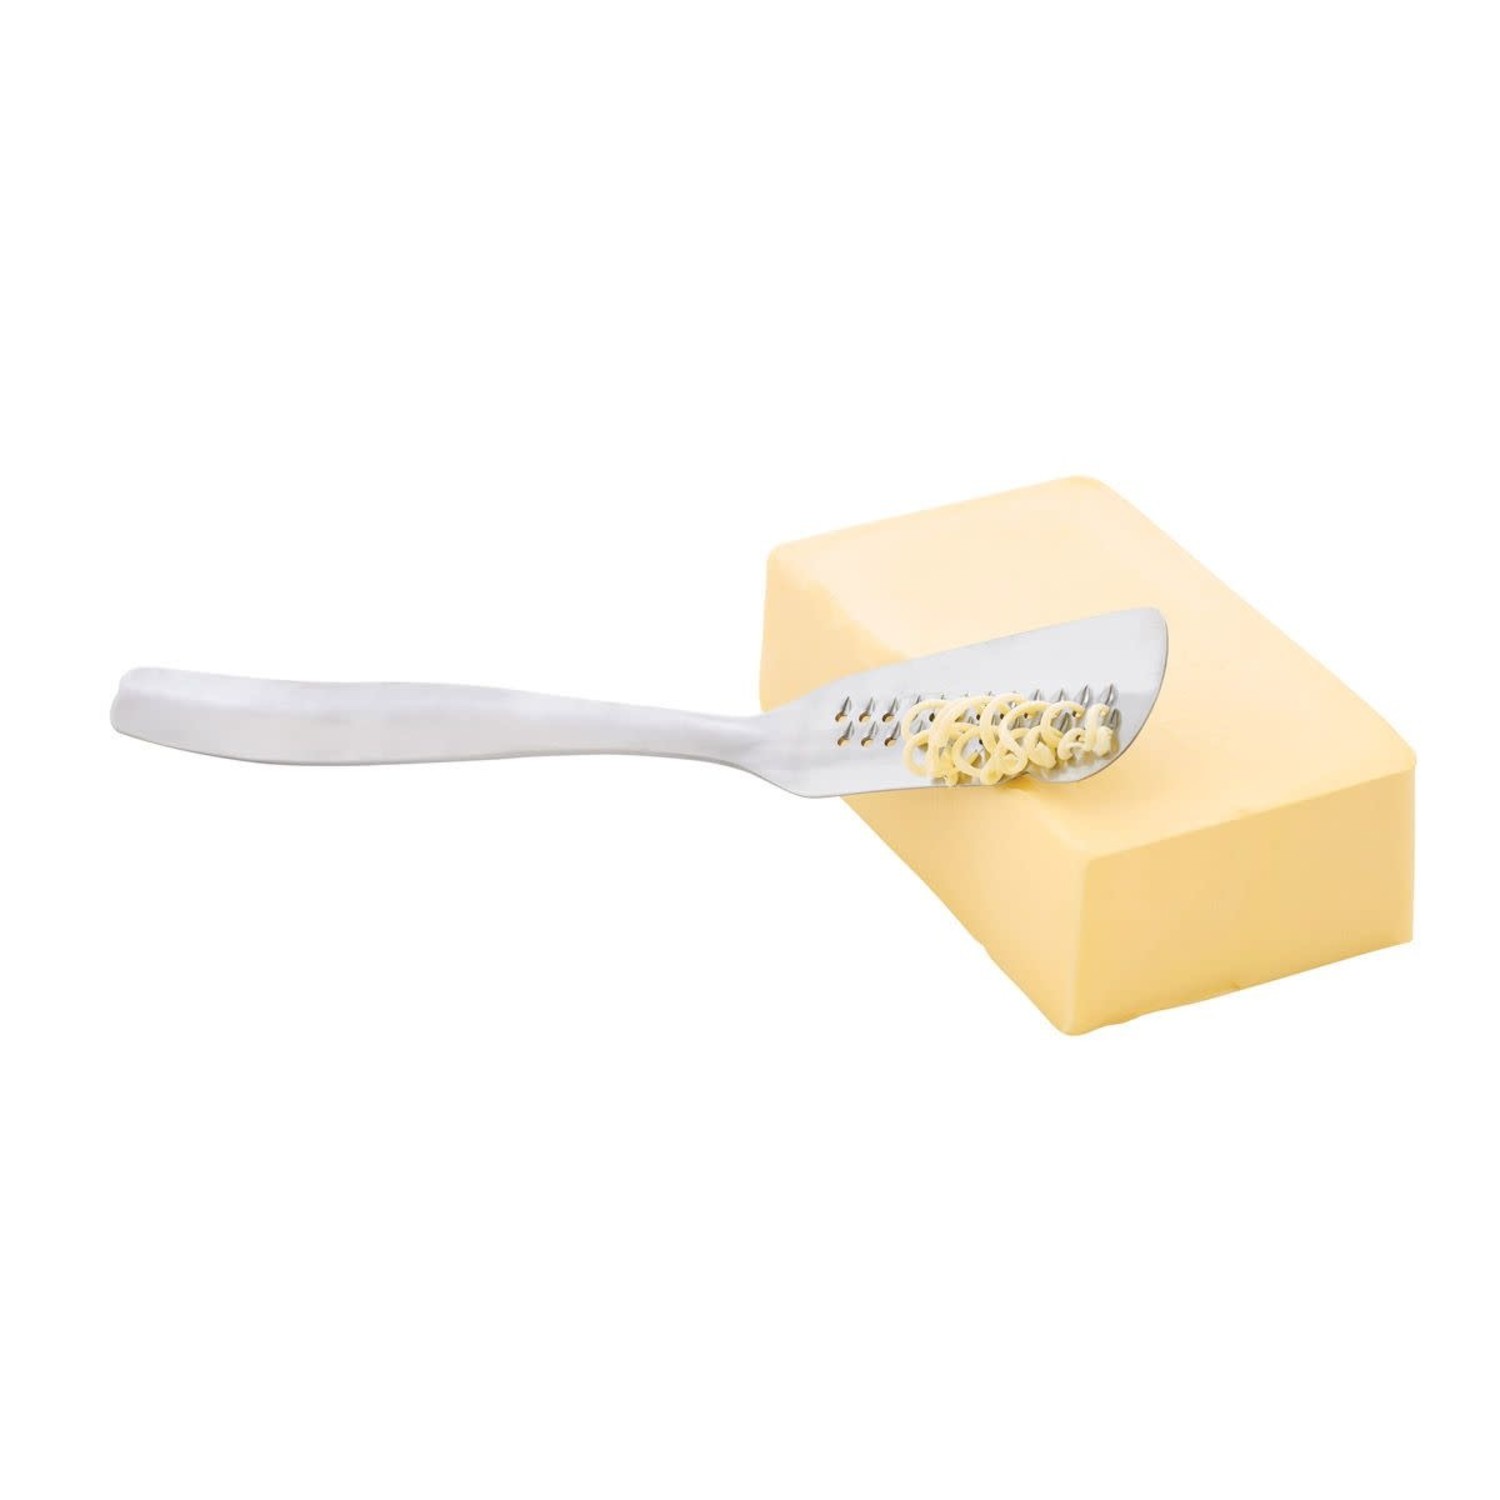 Simple preading simple preading stainless steel spatula spreader